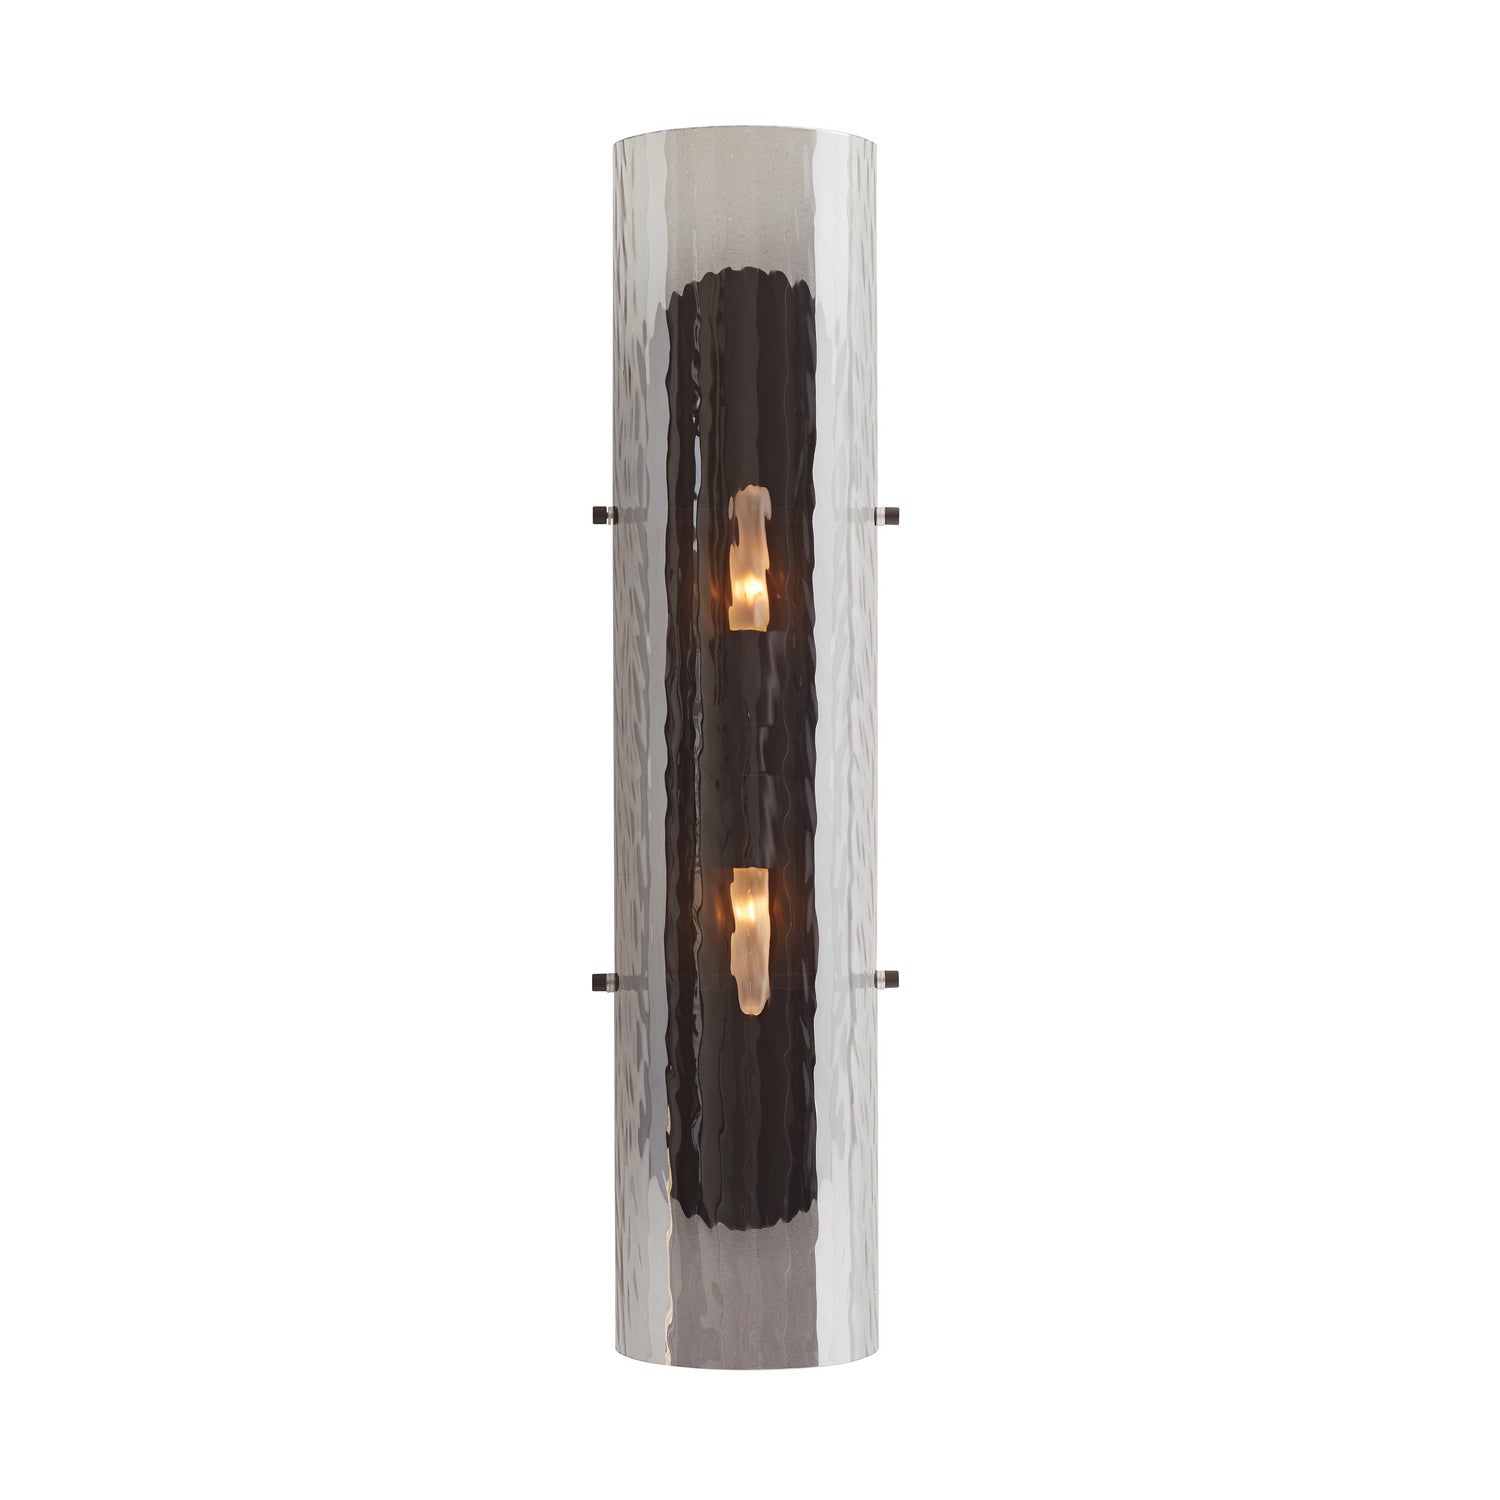 Two Light Wall Sconce from the Bend collection in Smoke finish